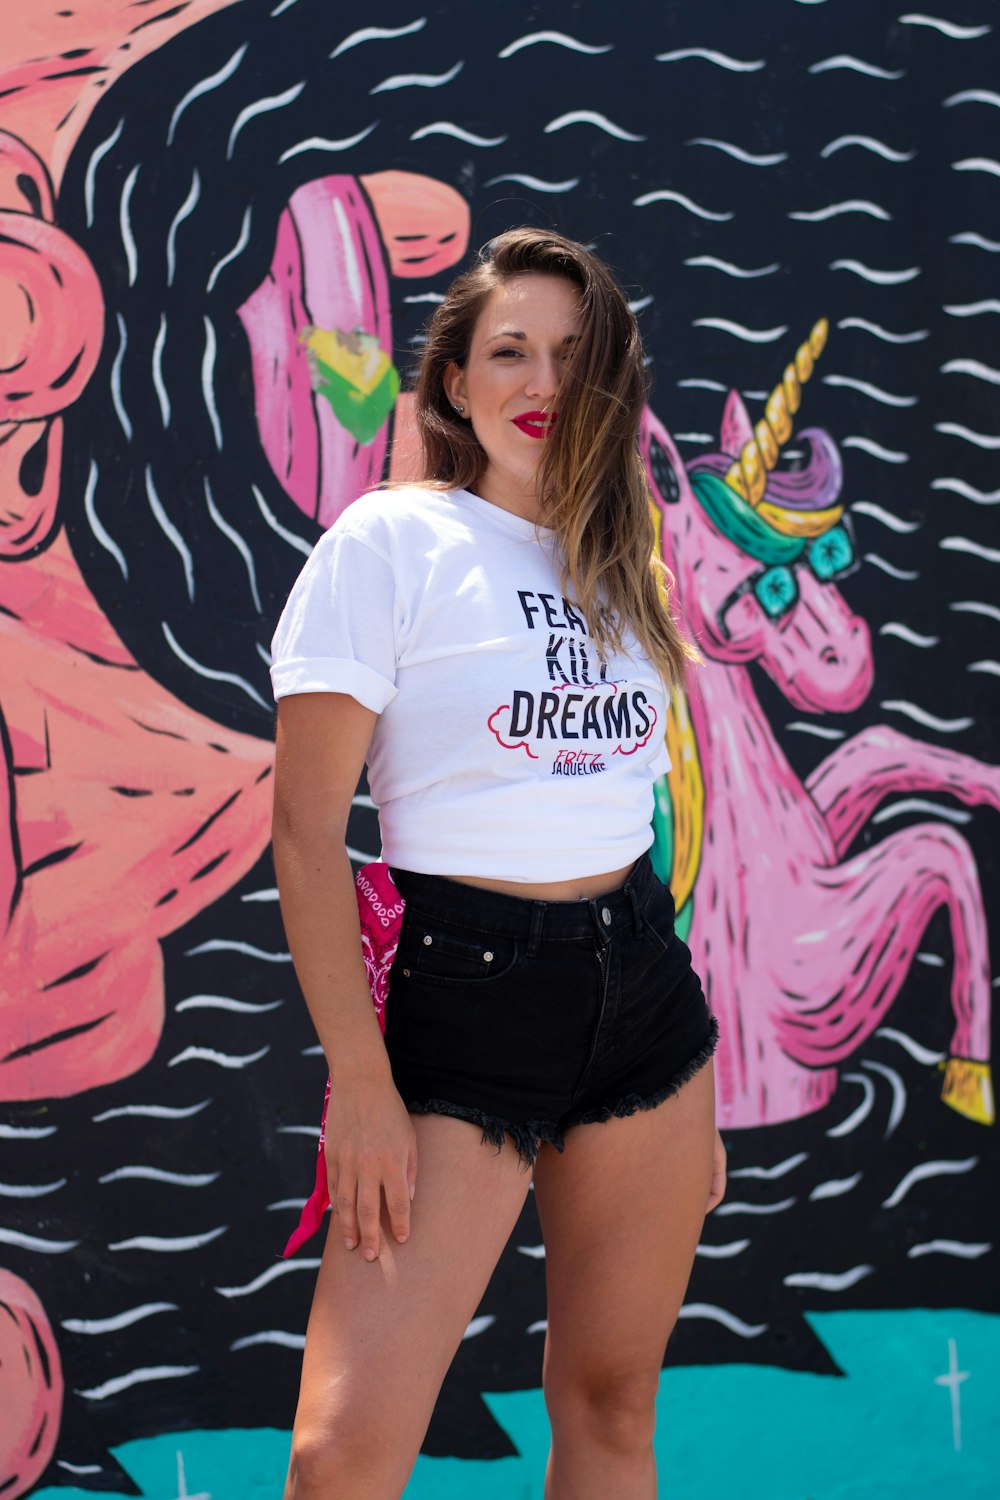 woman in white t-shirt and black shorts standing beside wall with graffiti